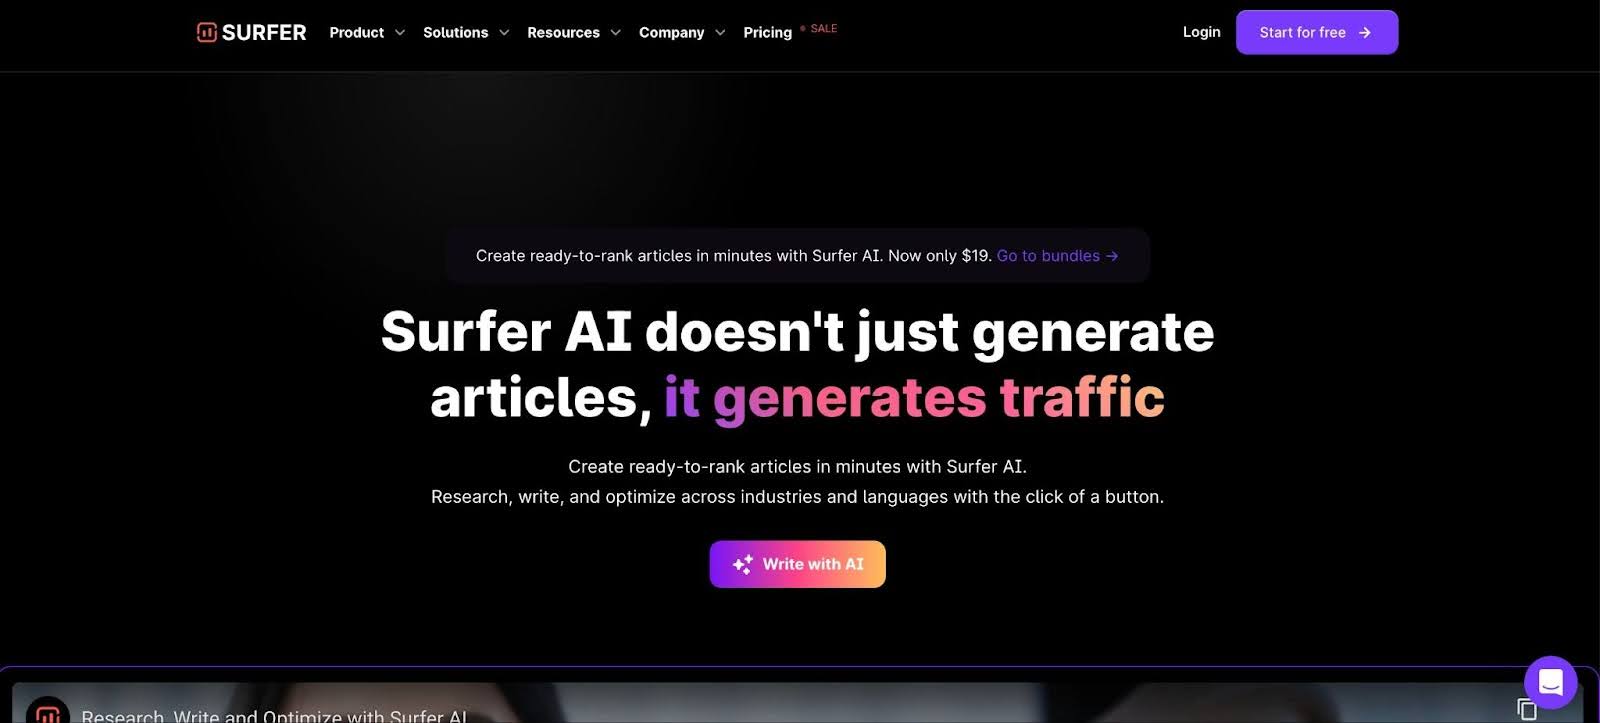 Black Background Product Page - Surfer AI doesn't just generate articles, it generates traffic.